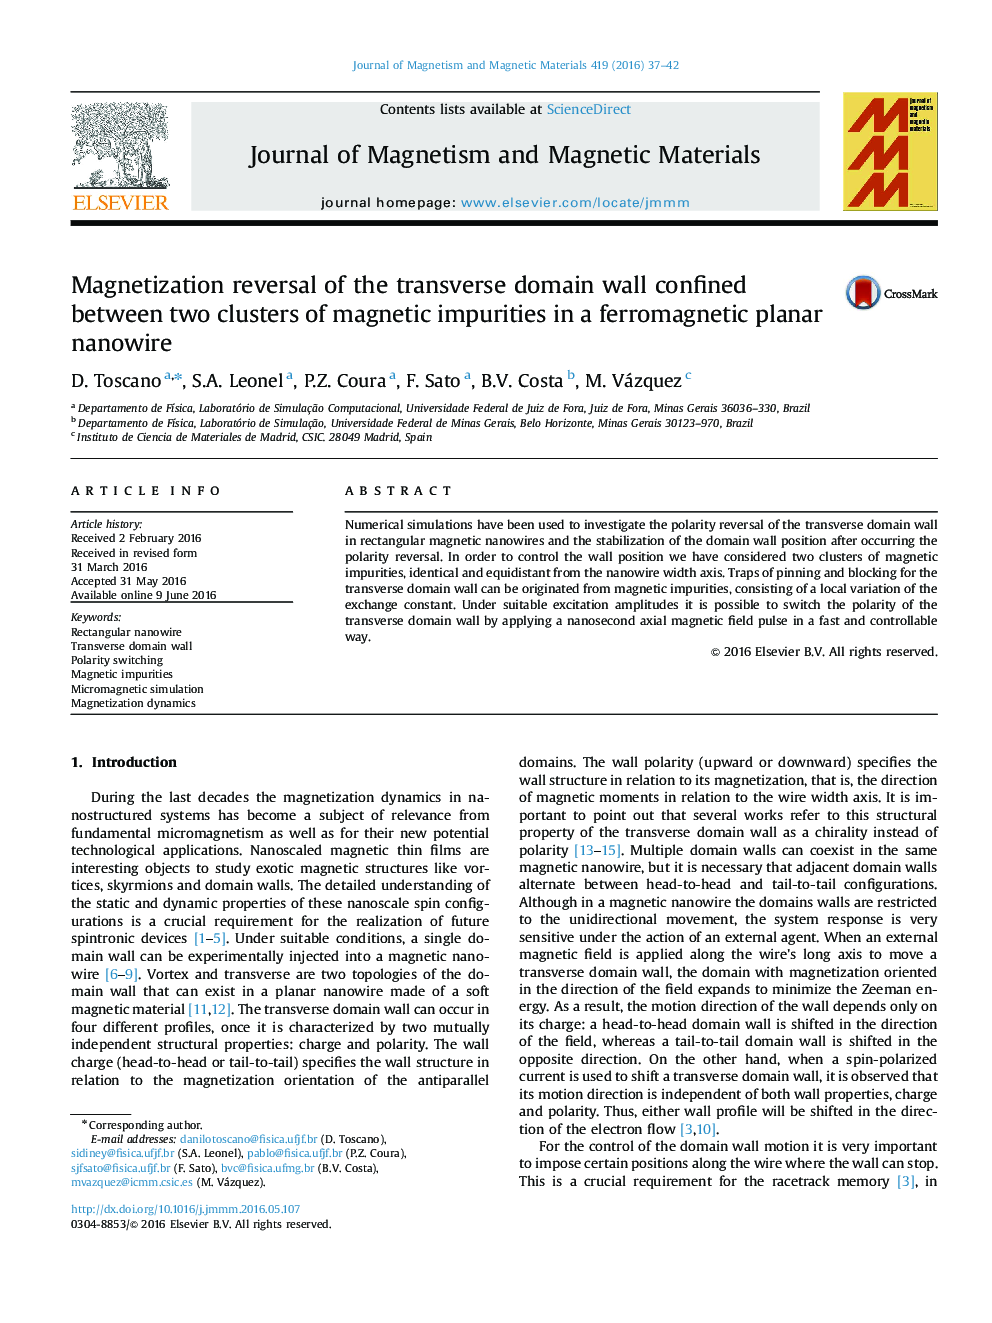 Magnetization reversal of the transverse domain wall confined between two clusters of magnetic impurities in a ferromagnetic planar nanowire